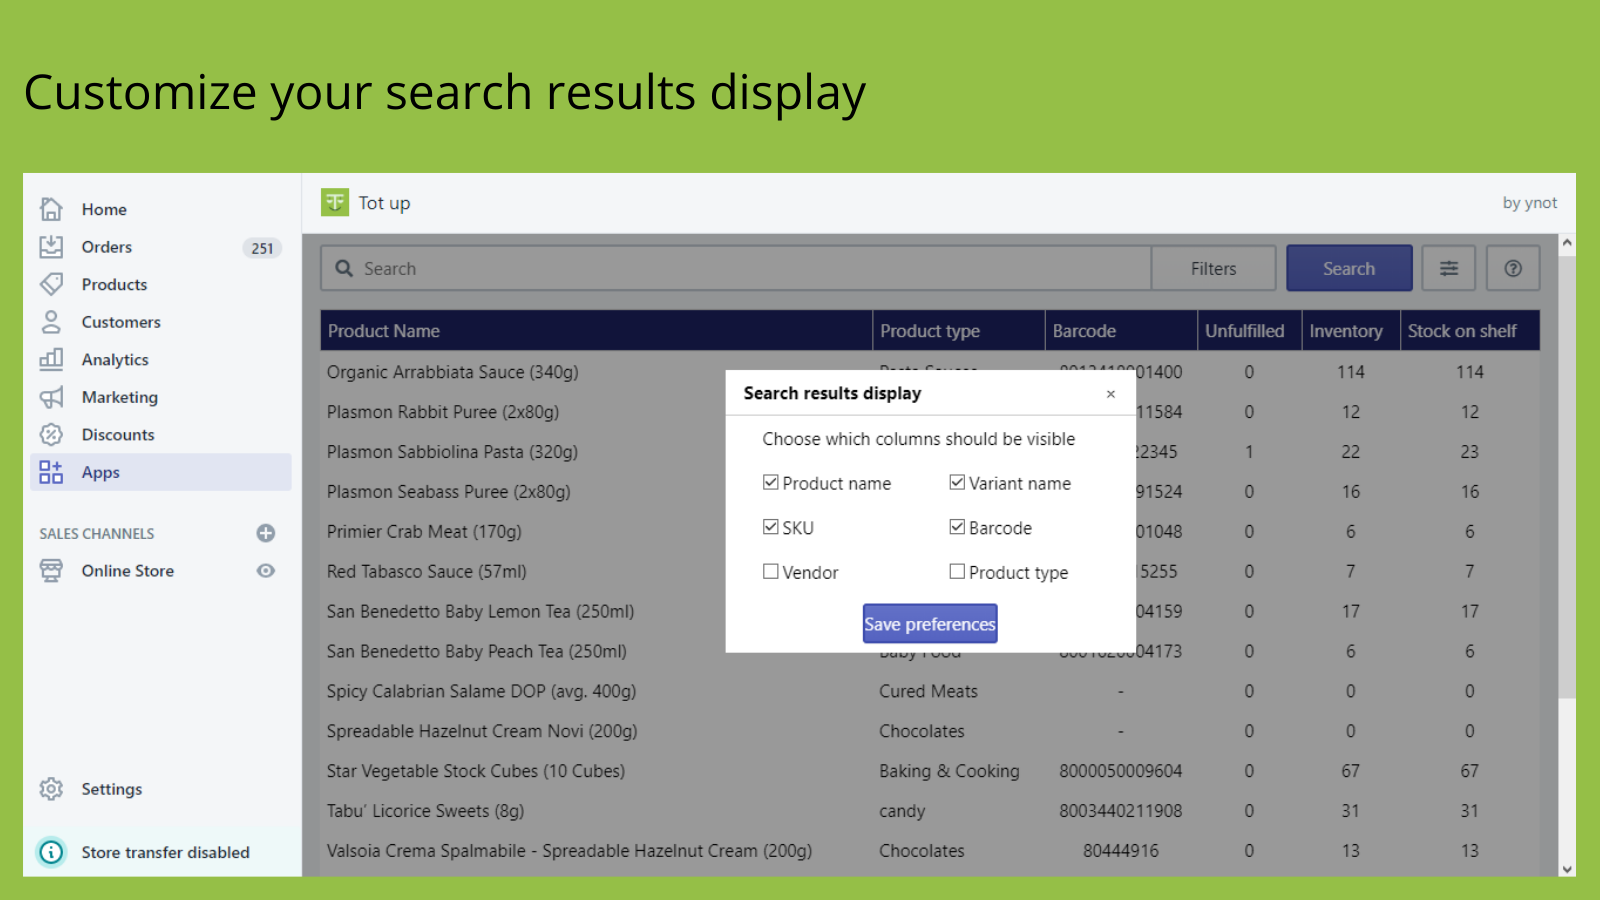 Customize your search results display